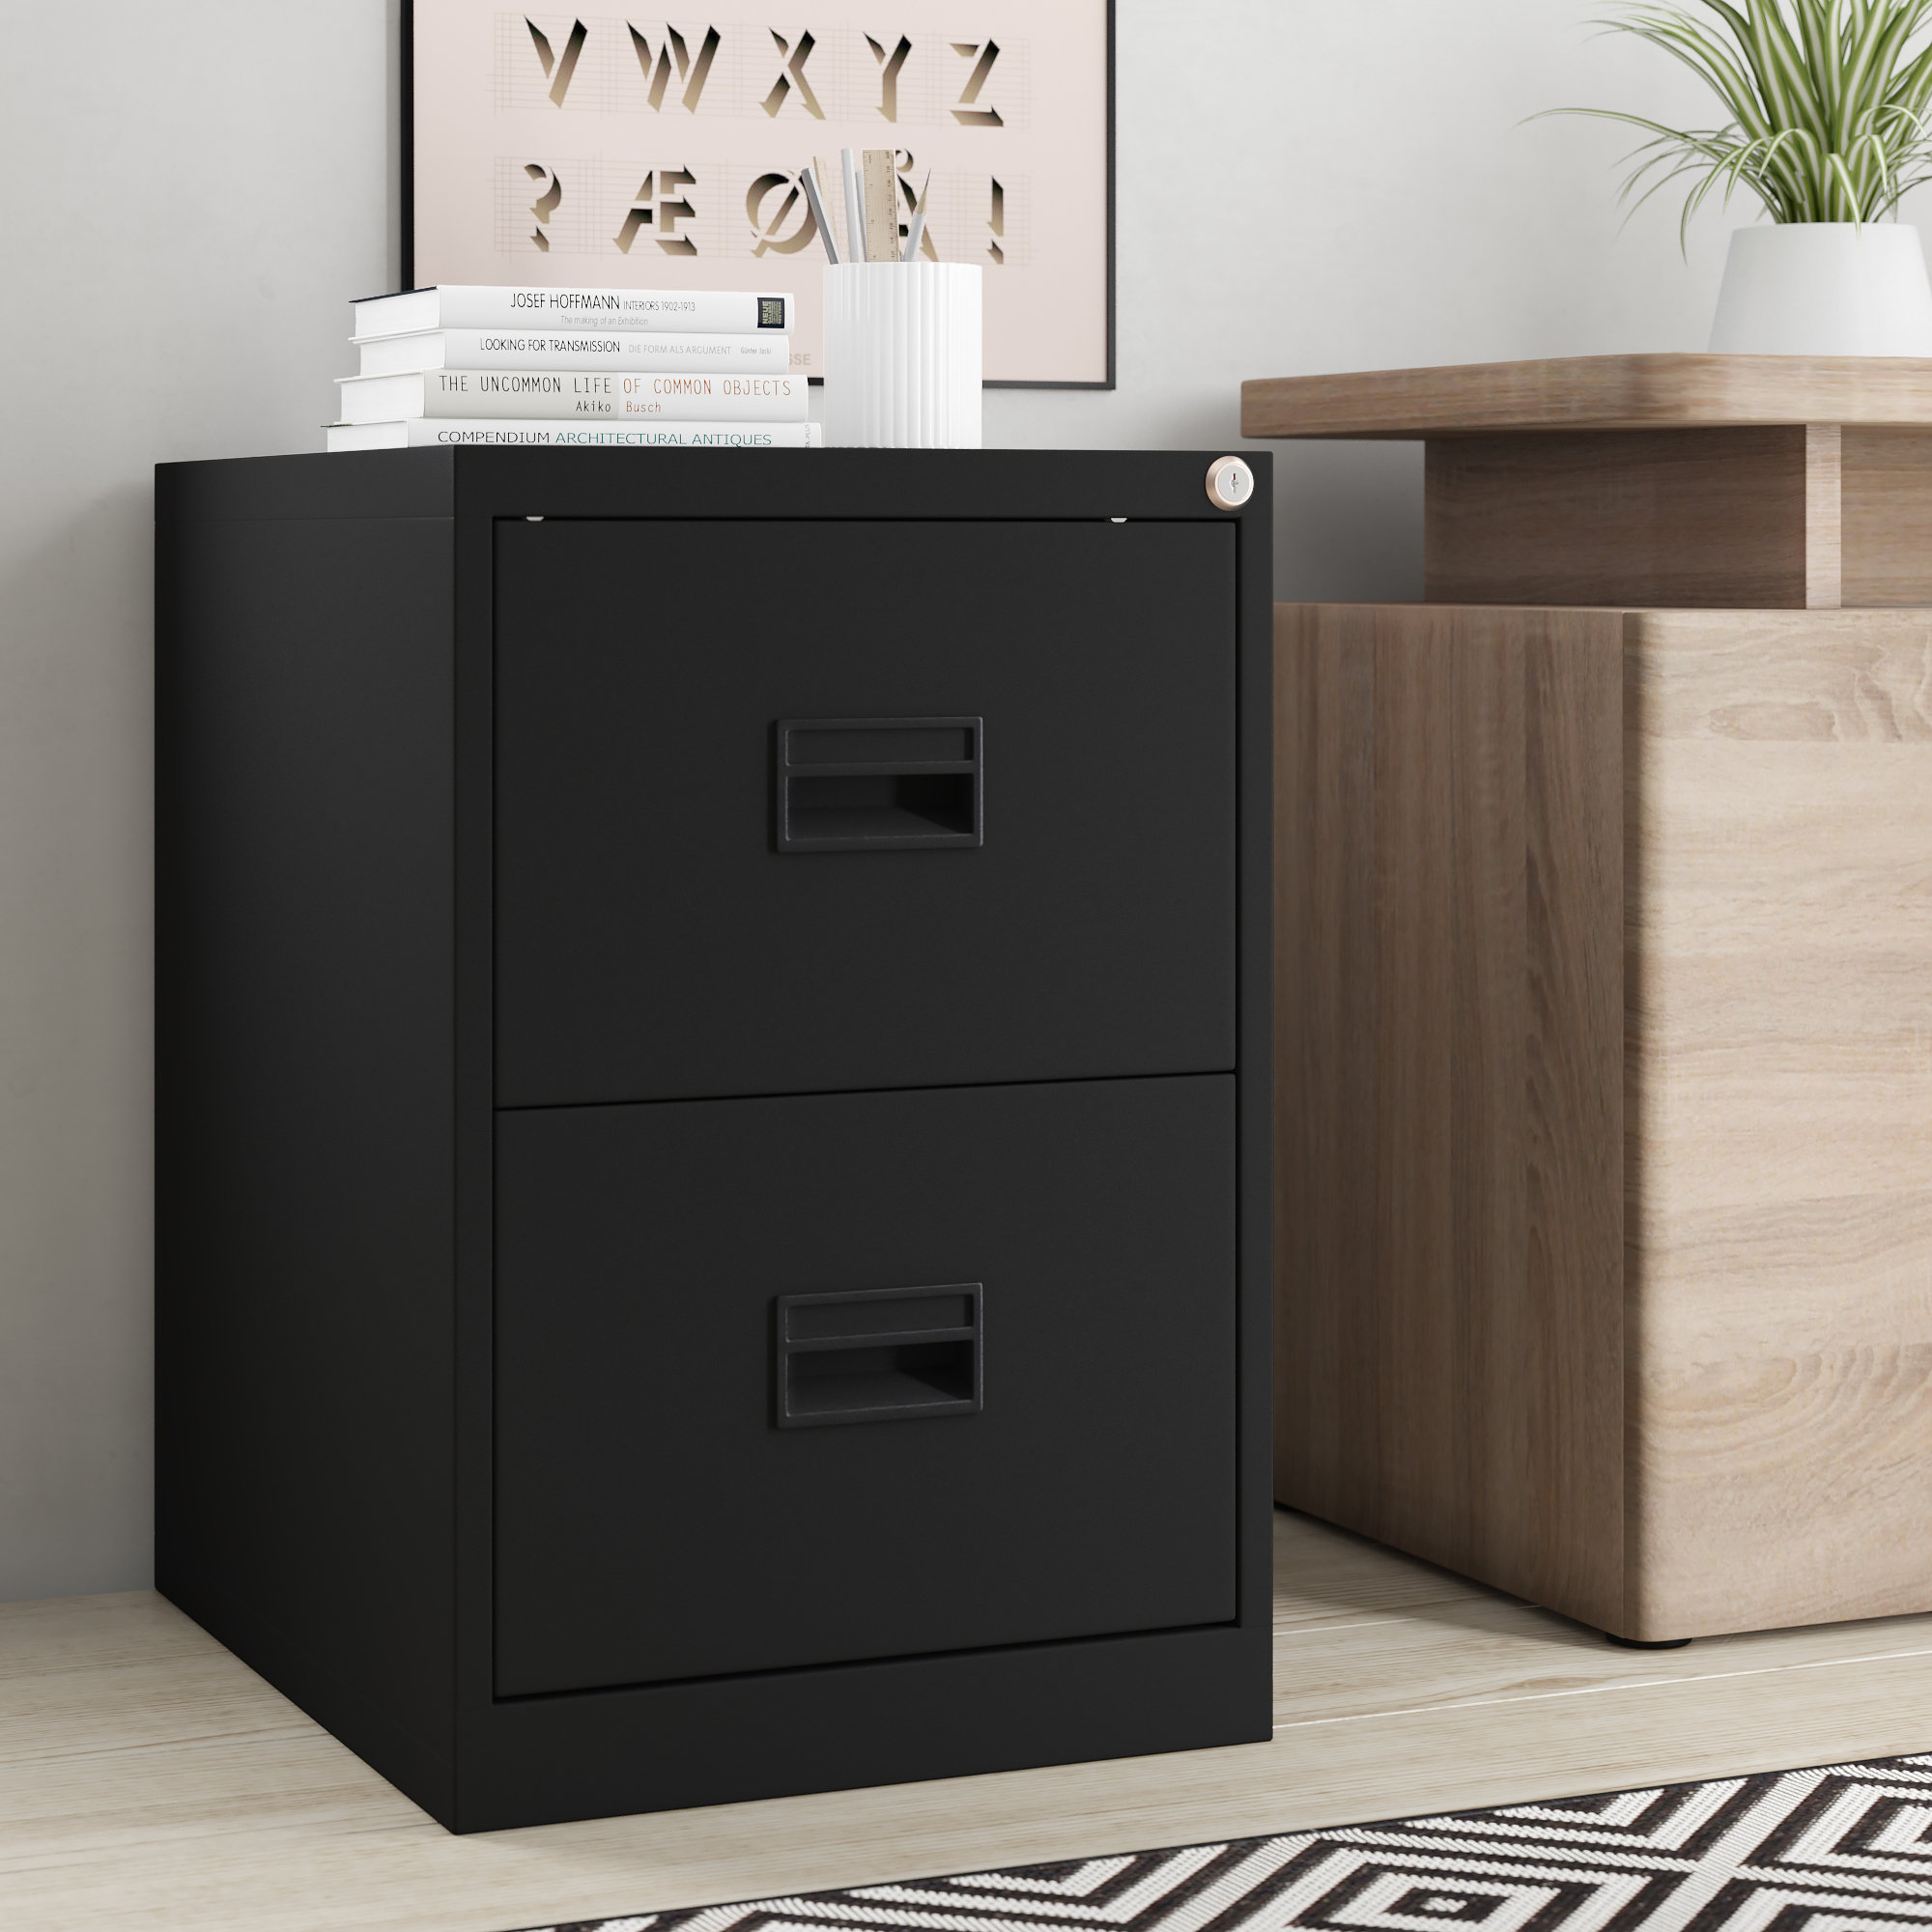 Symple Stuff Office 2 Drawer Filing Cabinet Reviews Wayfaircouk within size 2000 X 2000